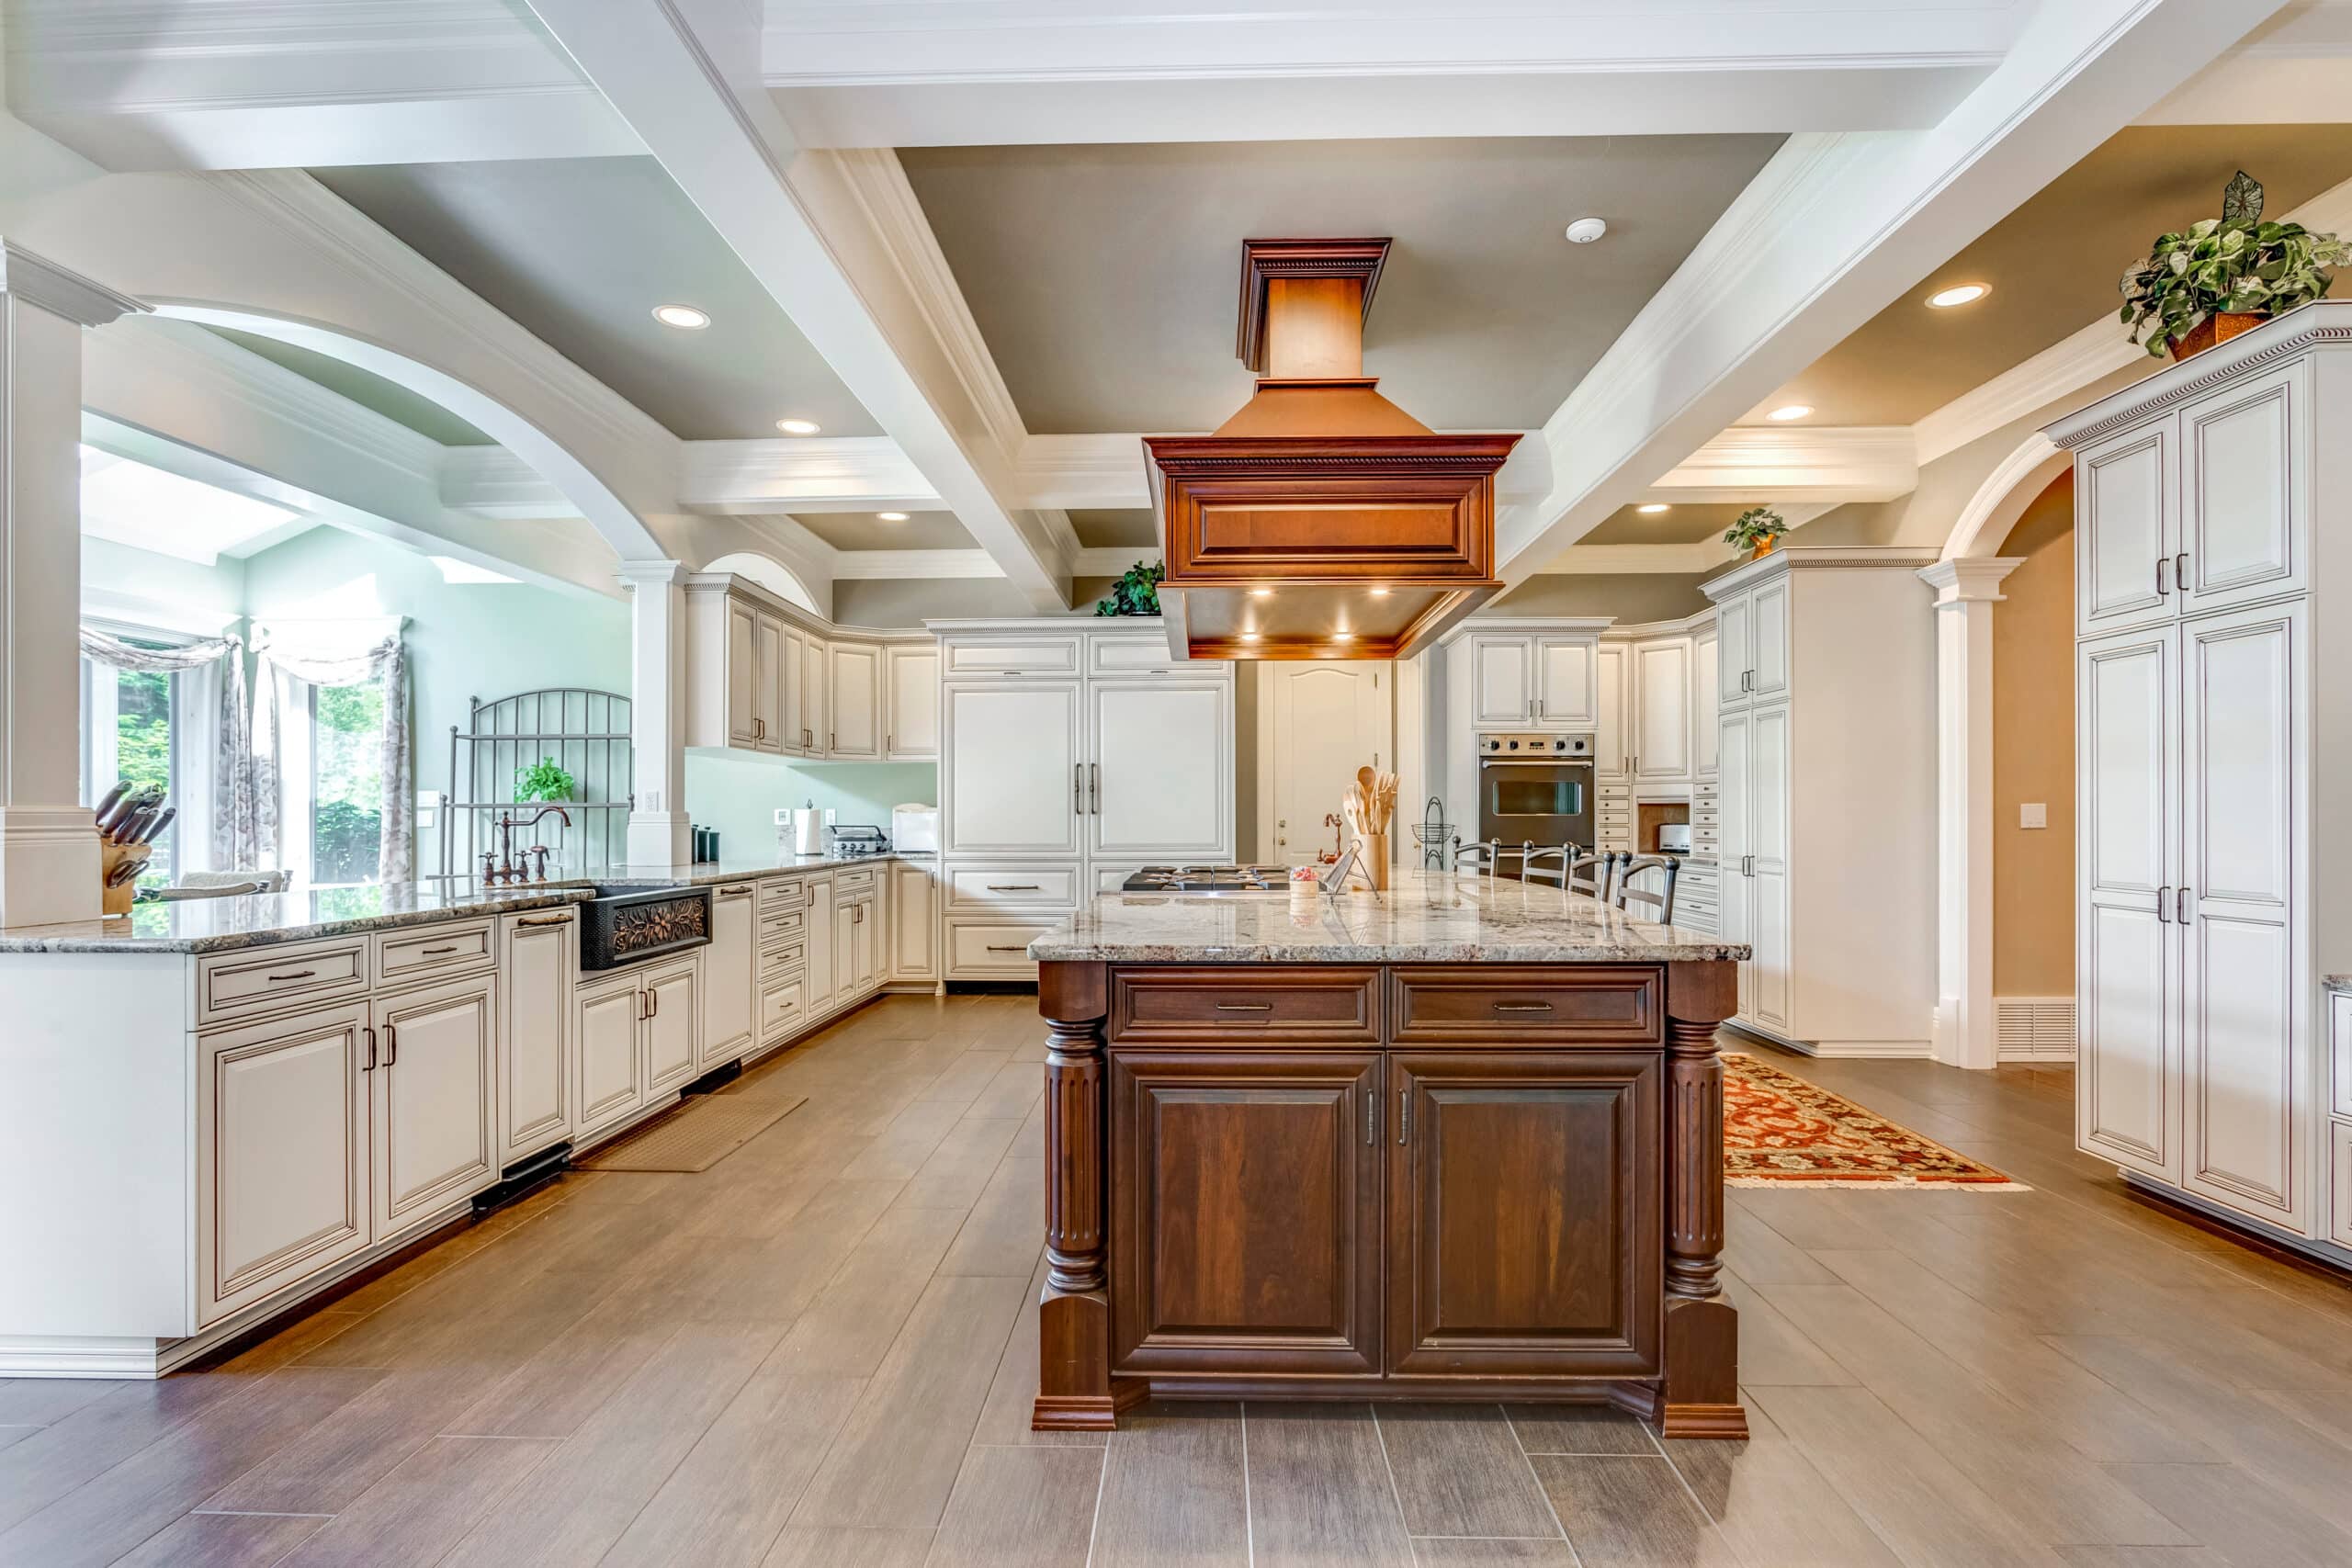 Stunning kitchen room design with large bar style island and coffered ceiling.